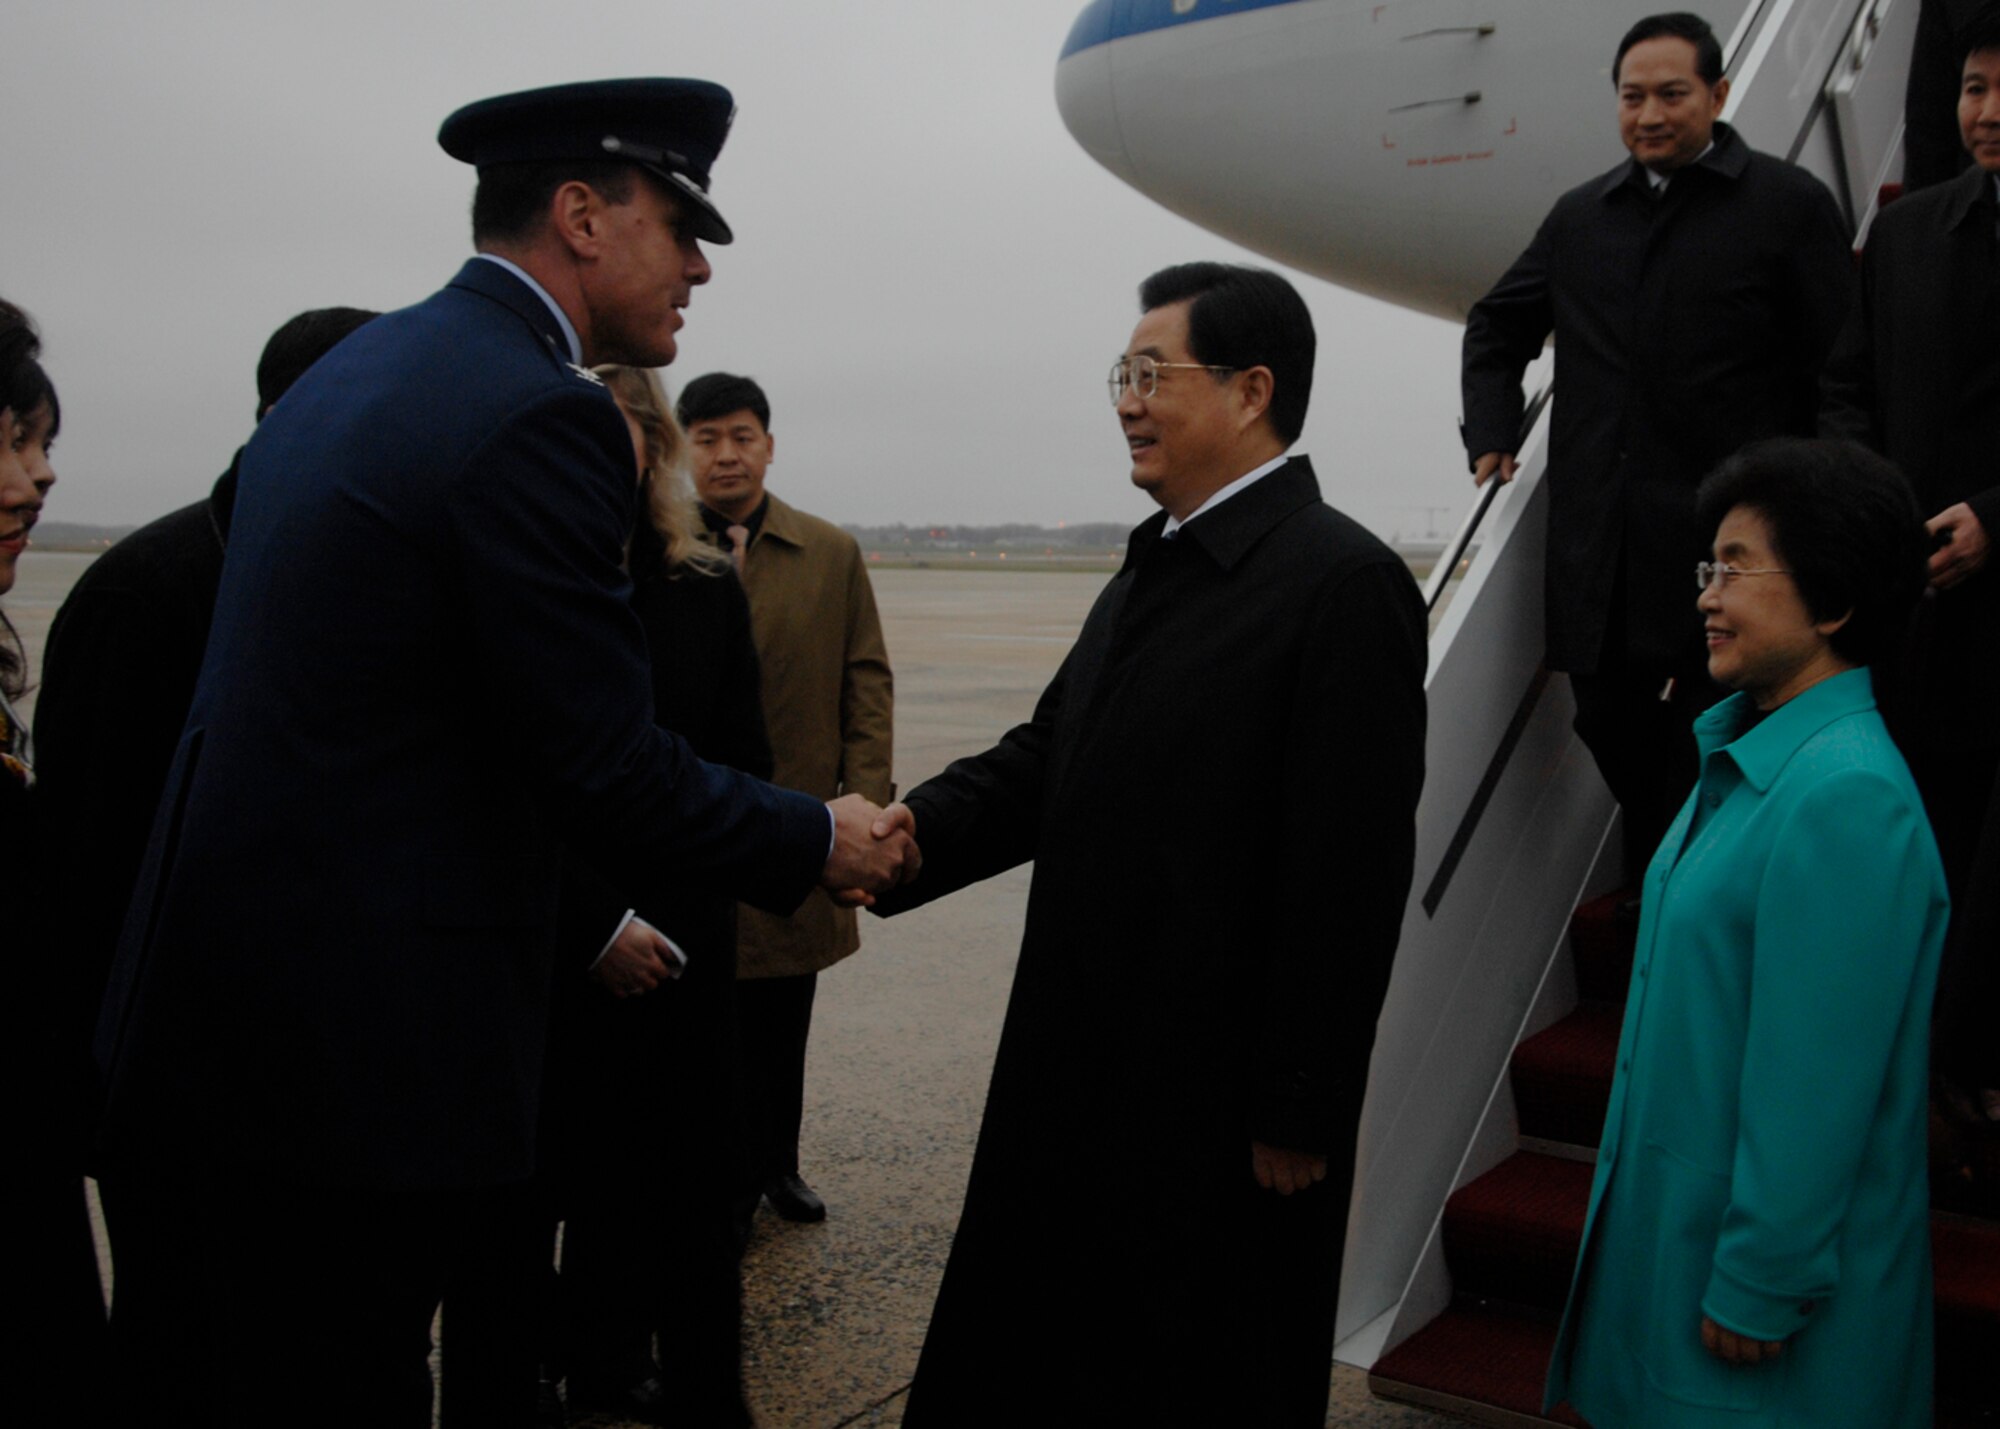 Colonel Steven M. Shepro, 316th Wing commander, greets Chinese President Hu Jintao at Andrews Air Force Base, Md., Nov. 14, 2008, for the two-day G20 Summit at the White House in Washington. The summit, hosted by U.S. President George W. Bush, will bring together world leaders to discuss the increasing global financial crisis, its causes and efforts to resolve it. (U.S. Air Force photo by Airman 1st Class Melissa V. Rodrigues)